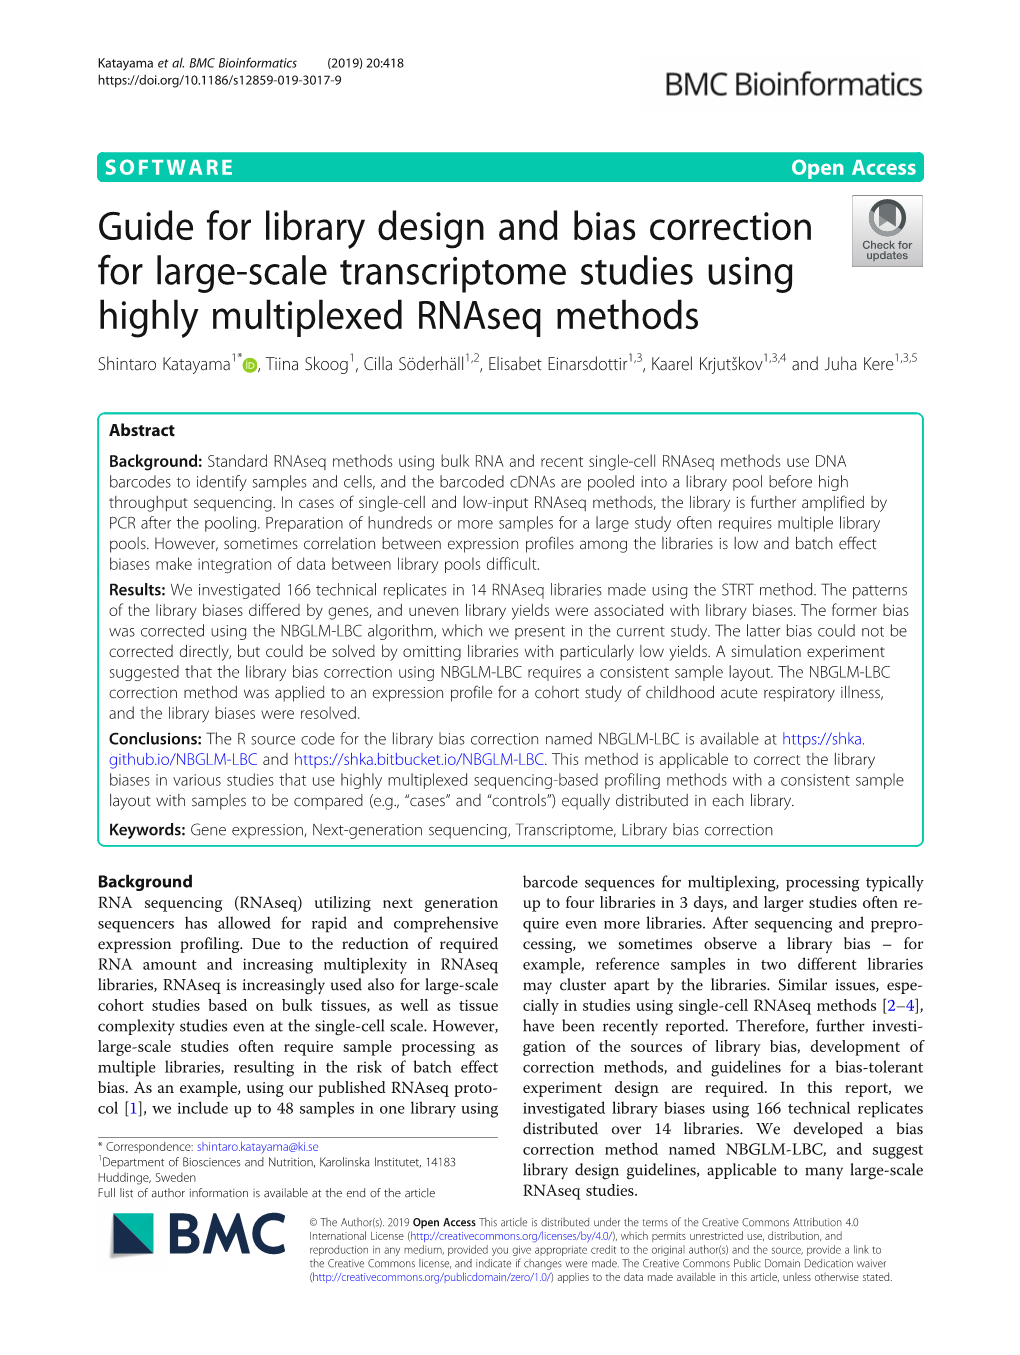 Guide for Library Design and Bias Correction for Large-Scale